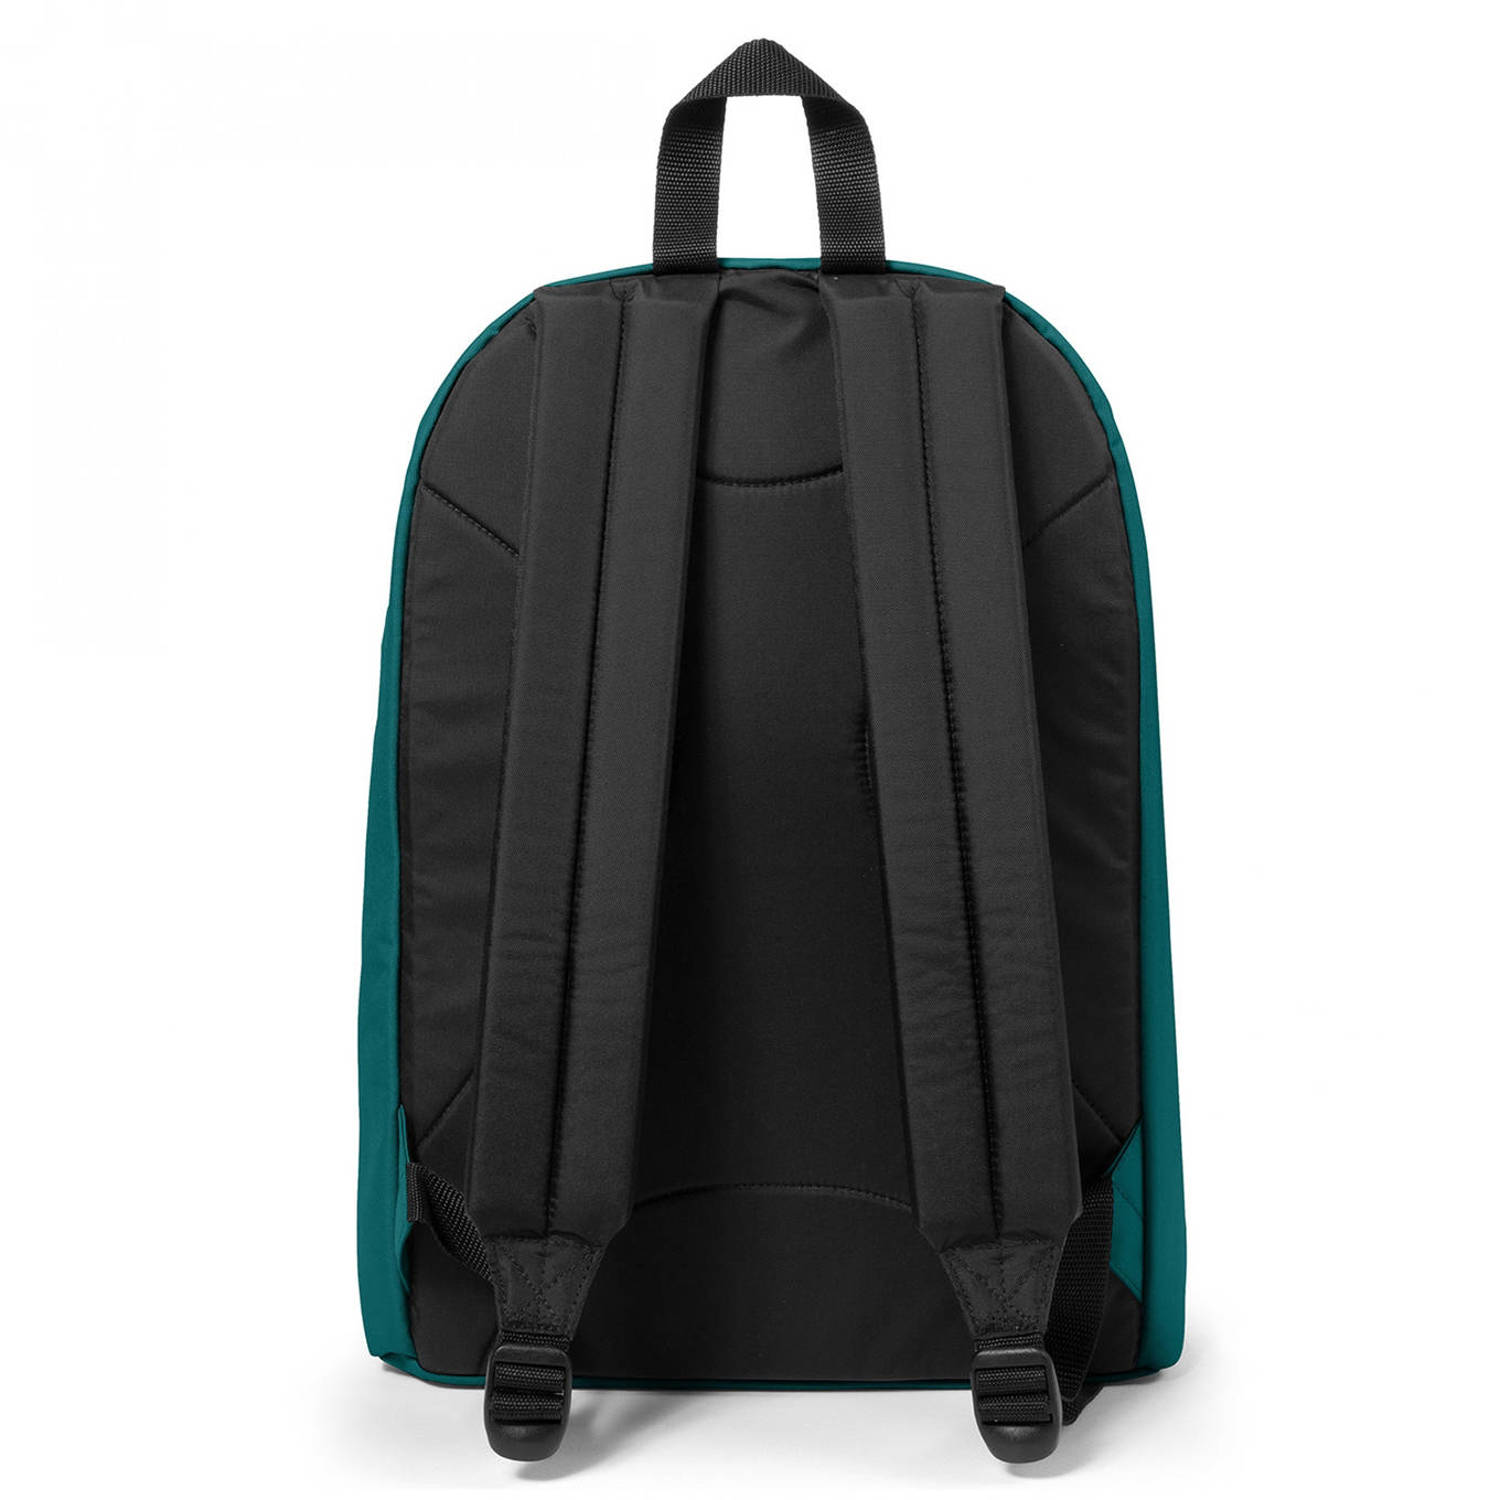 Eastpak rugzak Out of Office peacock green